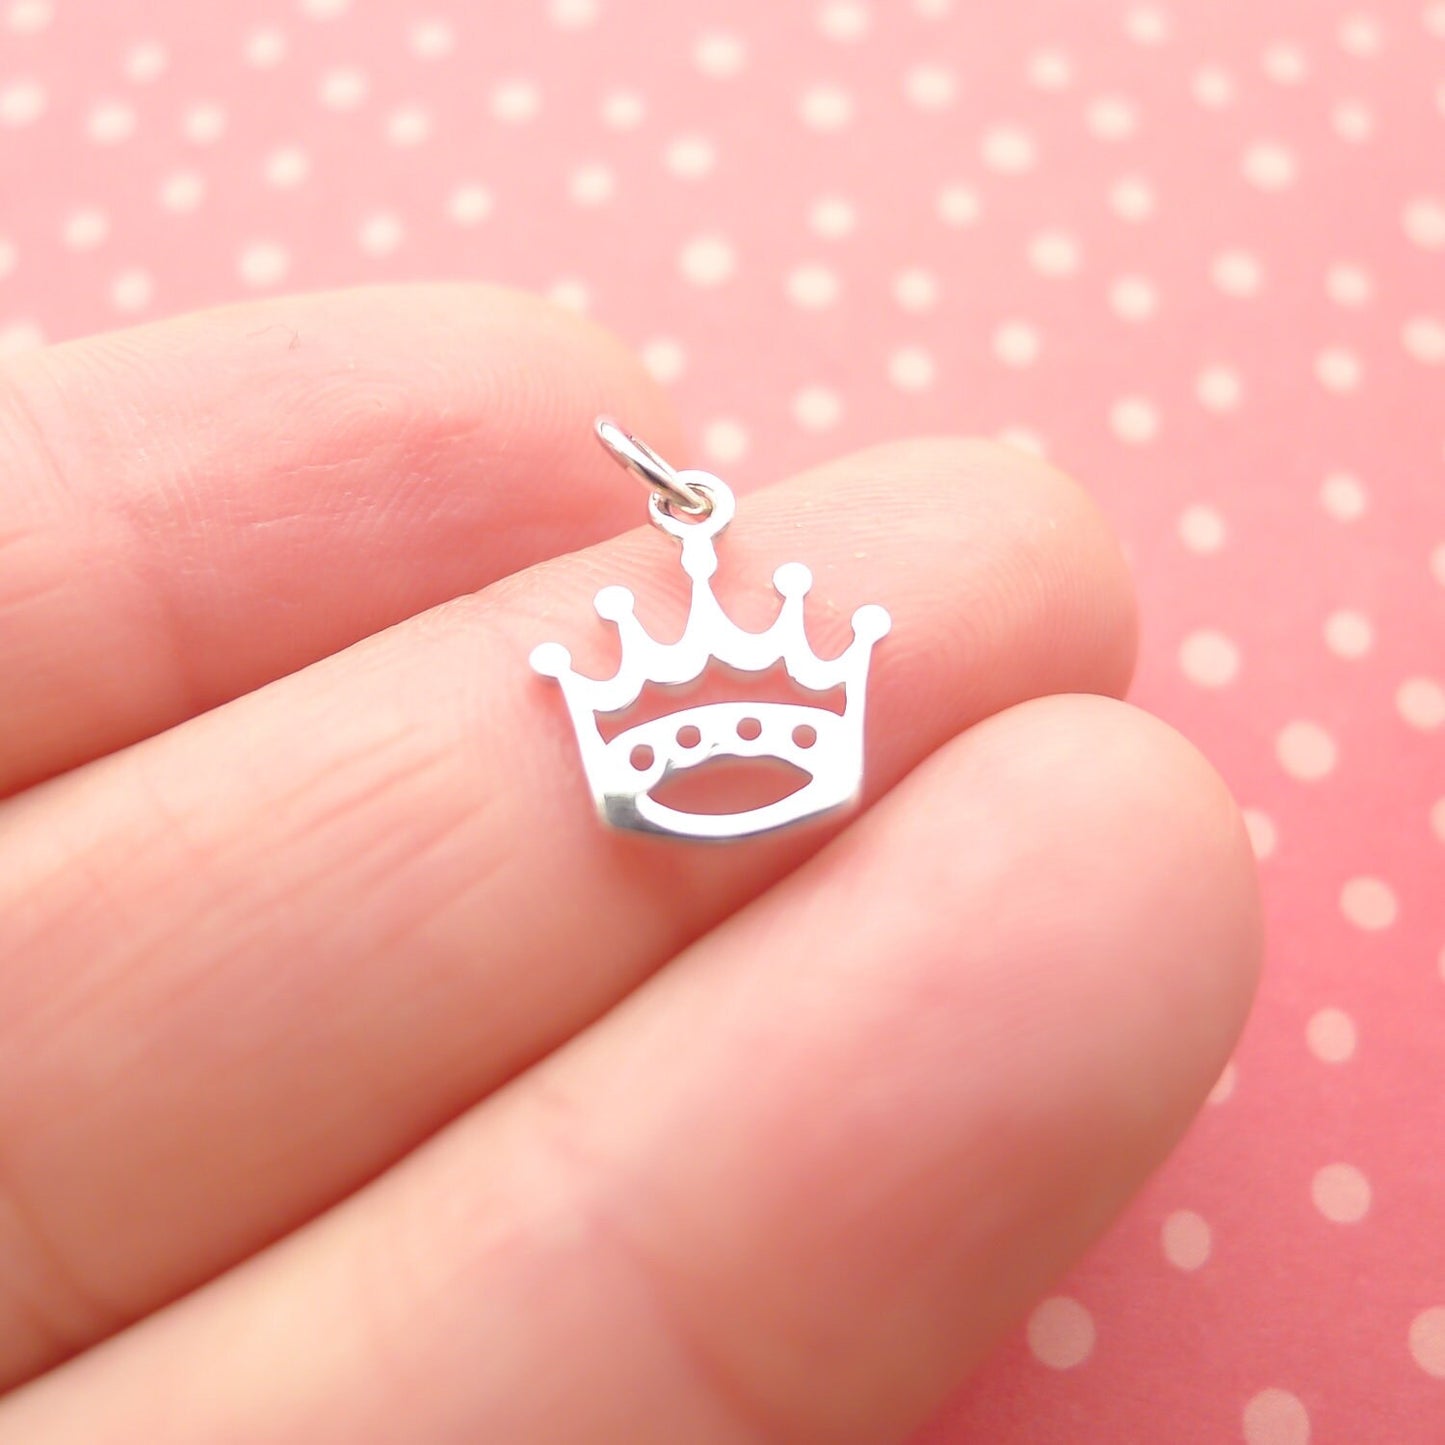 Crown Charm Sterling Silver Princess Queen King Price Jewelry Pendant